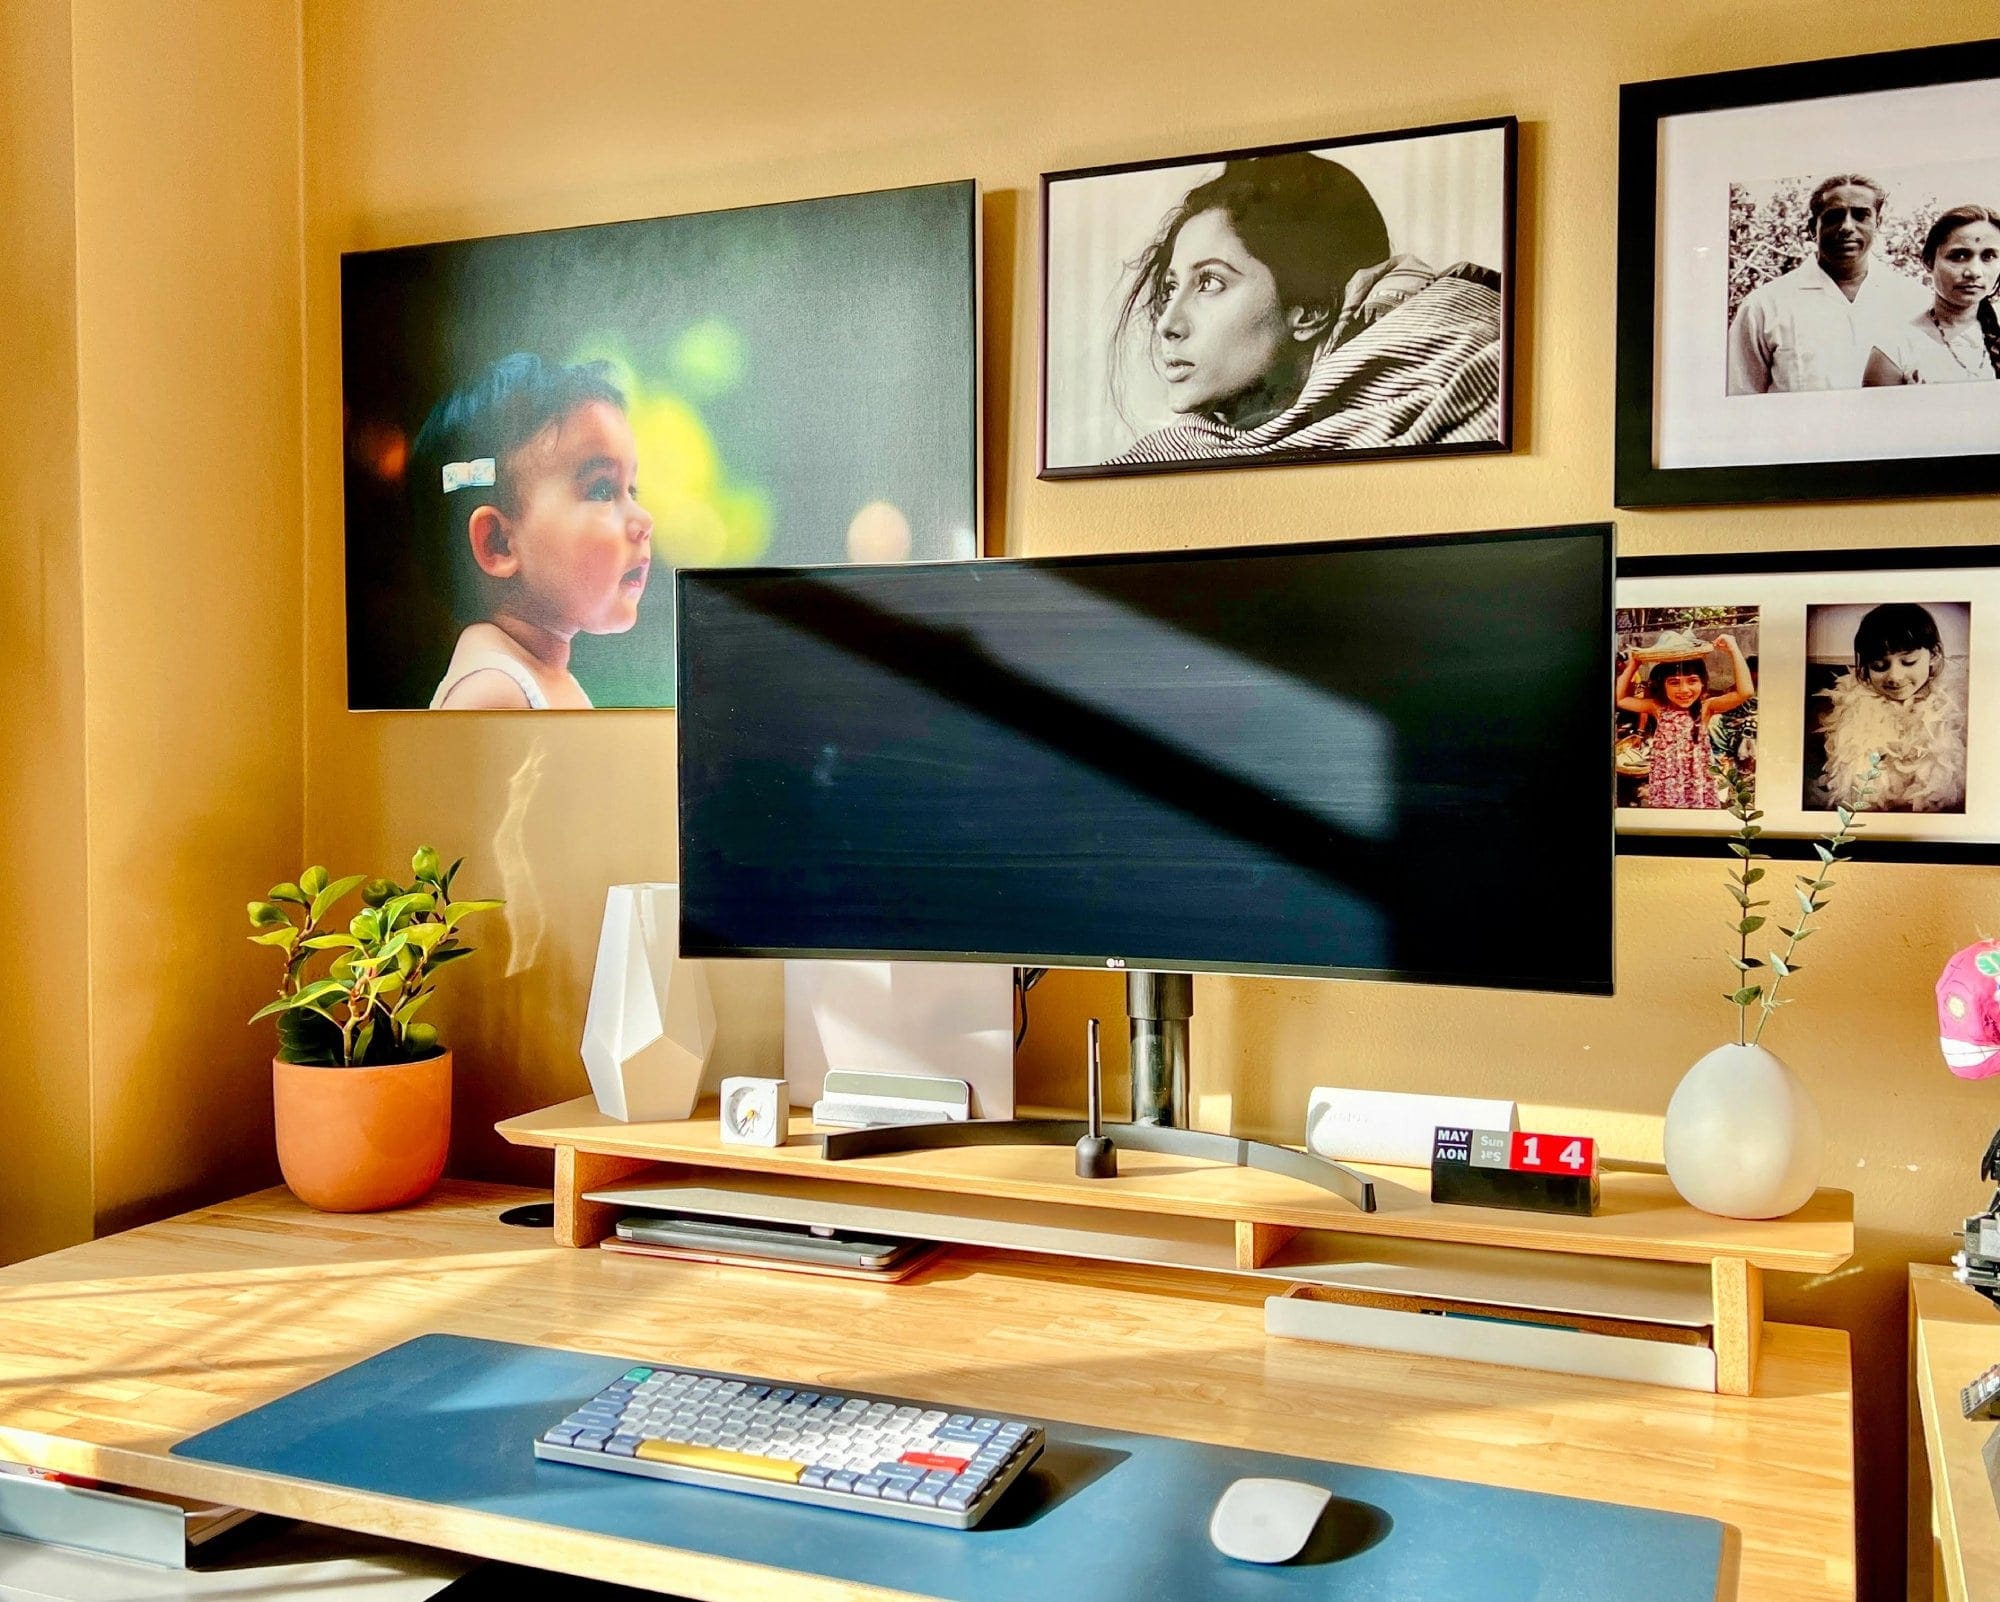 A home office desk bathed in golden sunlight, featuring a computer monitor, a plant, personal photos on the wall, and a desk calendar showing May 14th